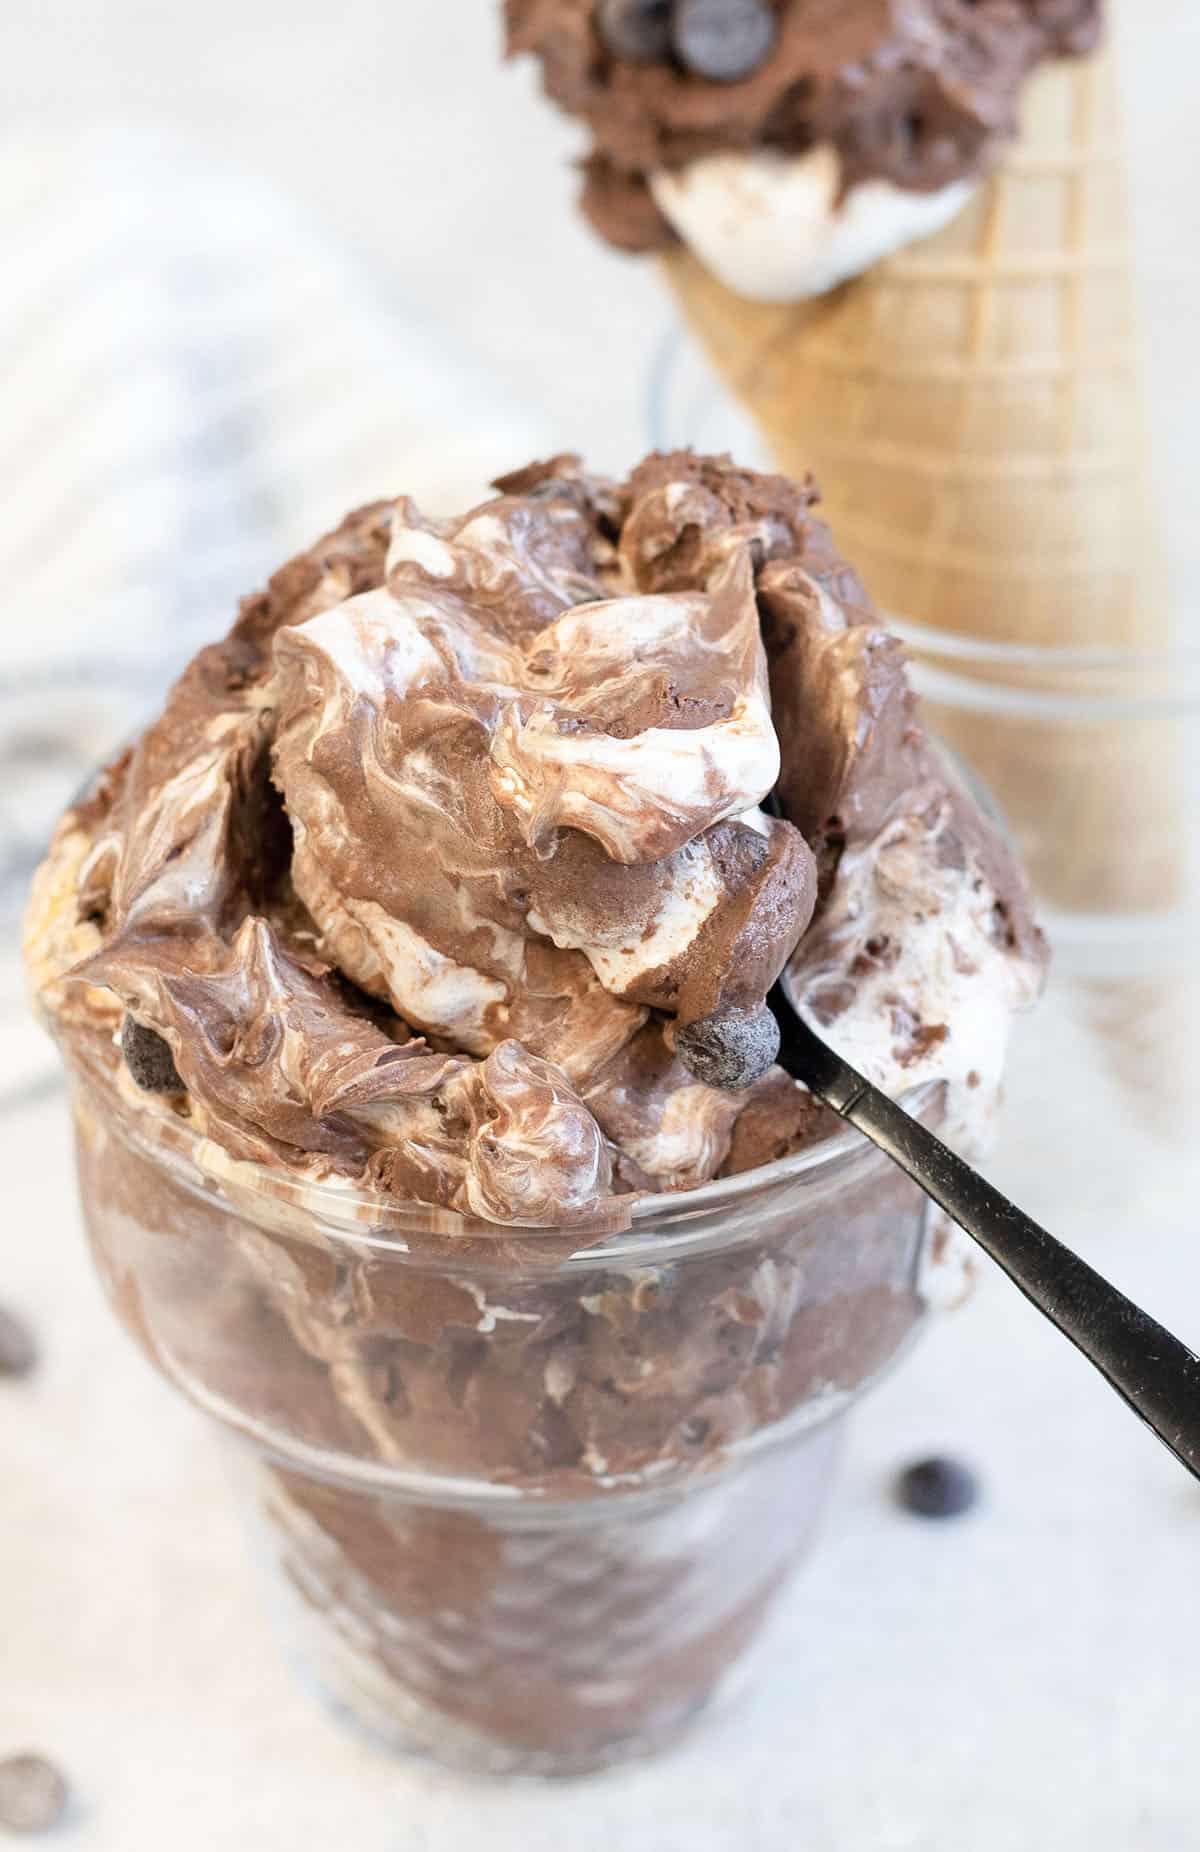 A spoonful of chocolate marshmallow ice cream.